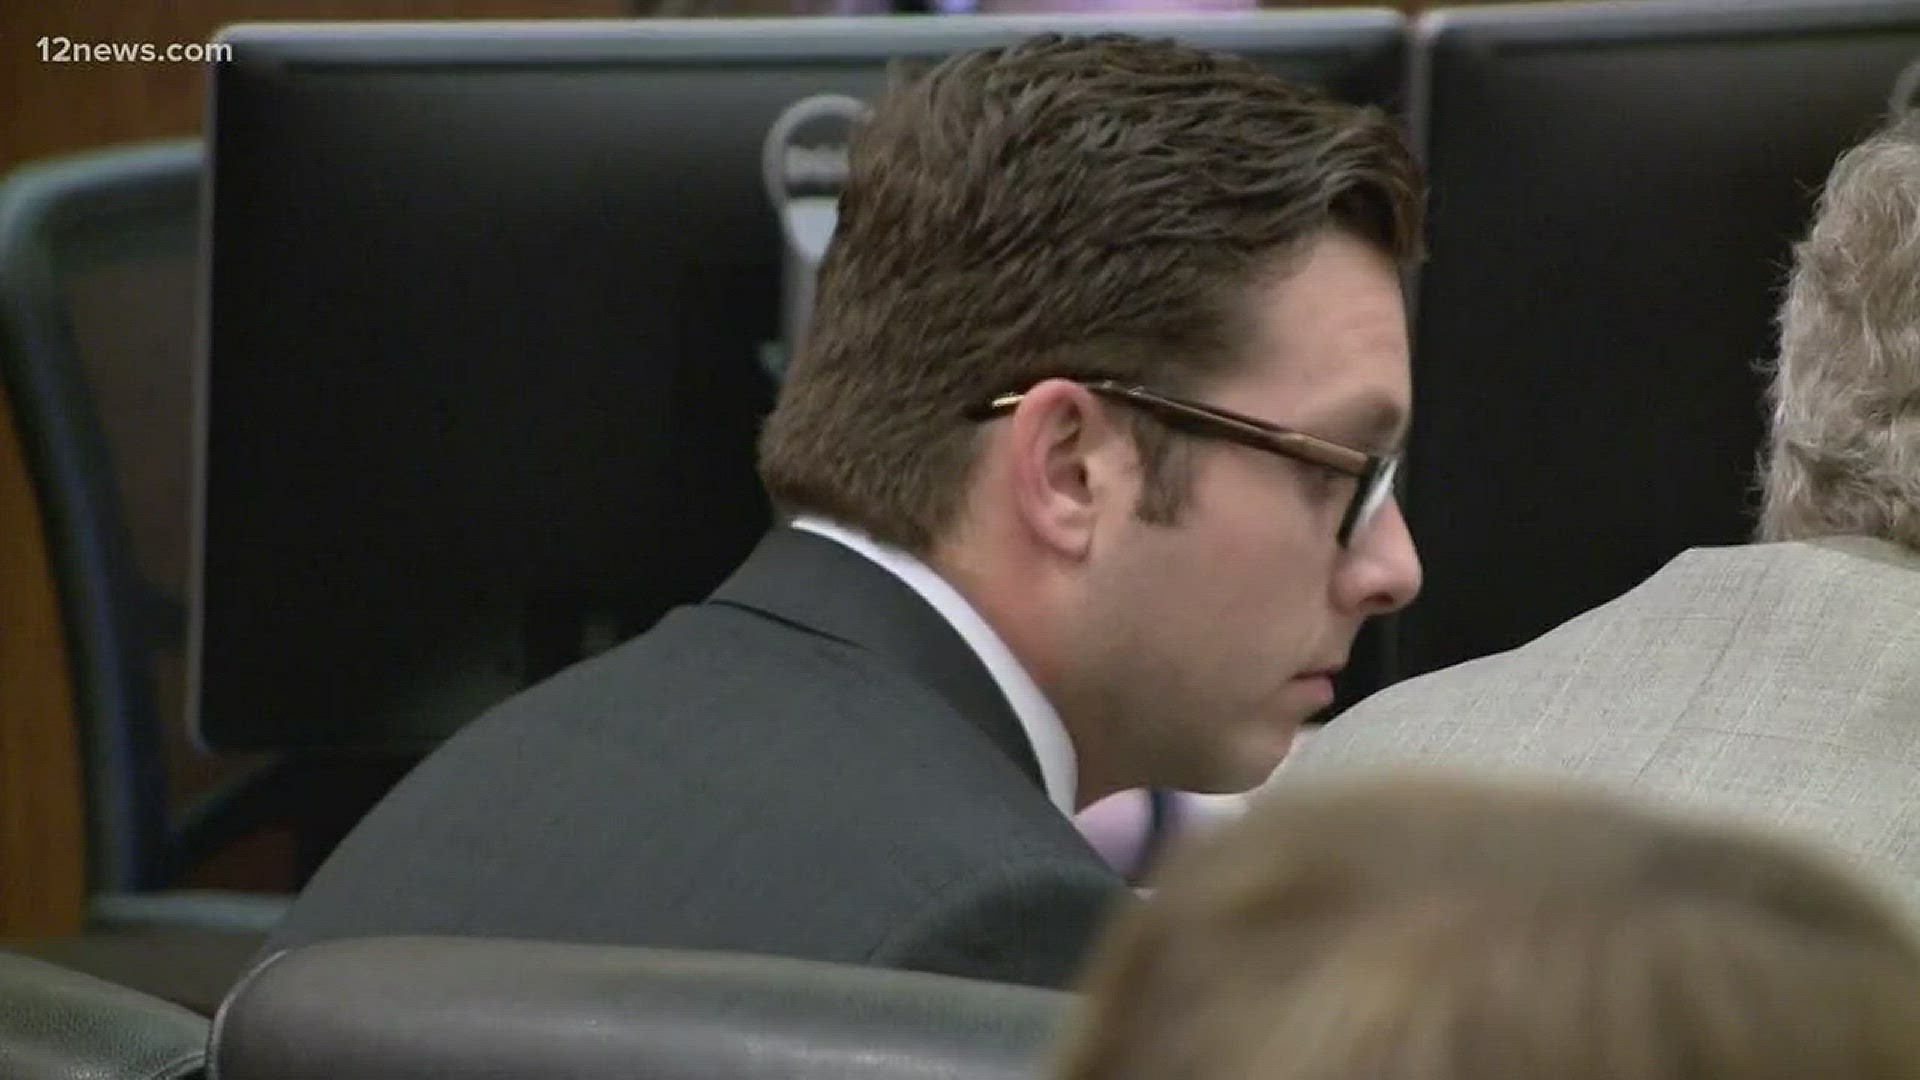 Mesa officer Philip Brailsford was found "not guilty" on all counts in the death of Daniel Shaver.